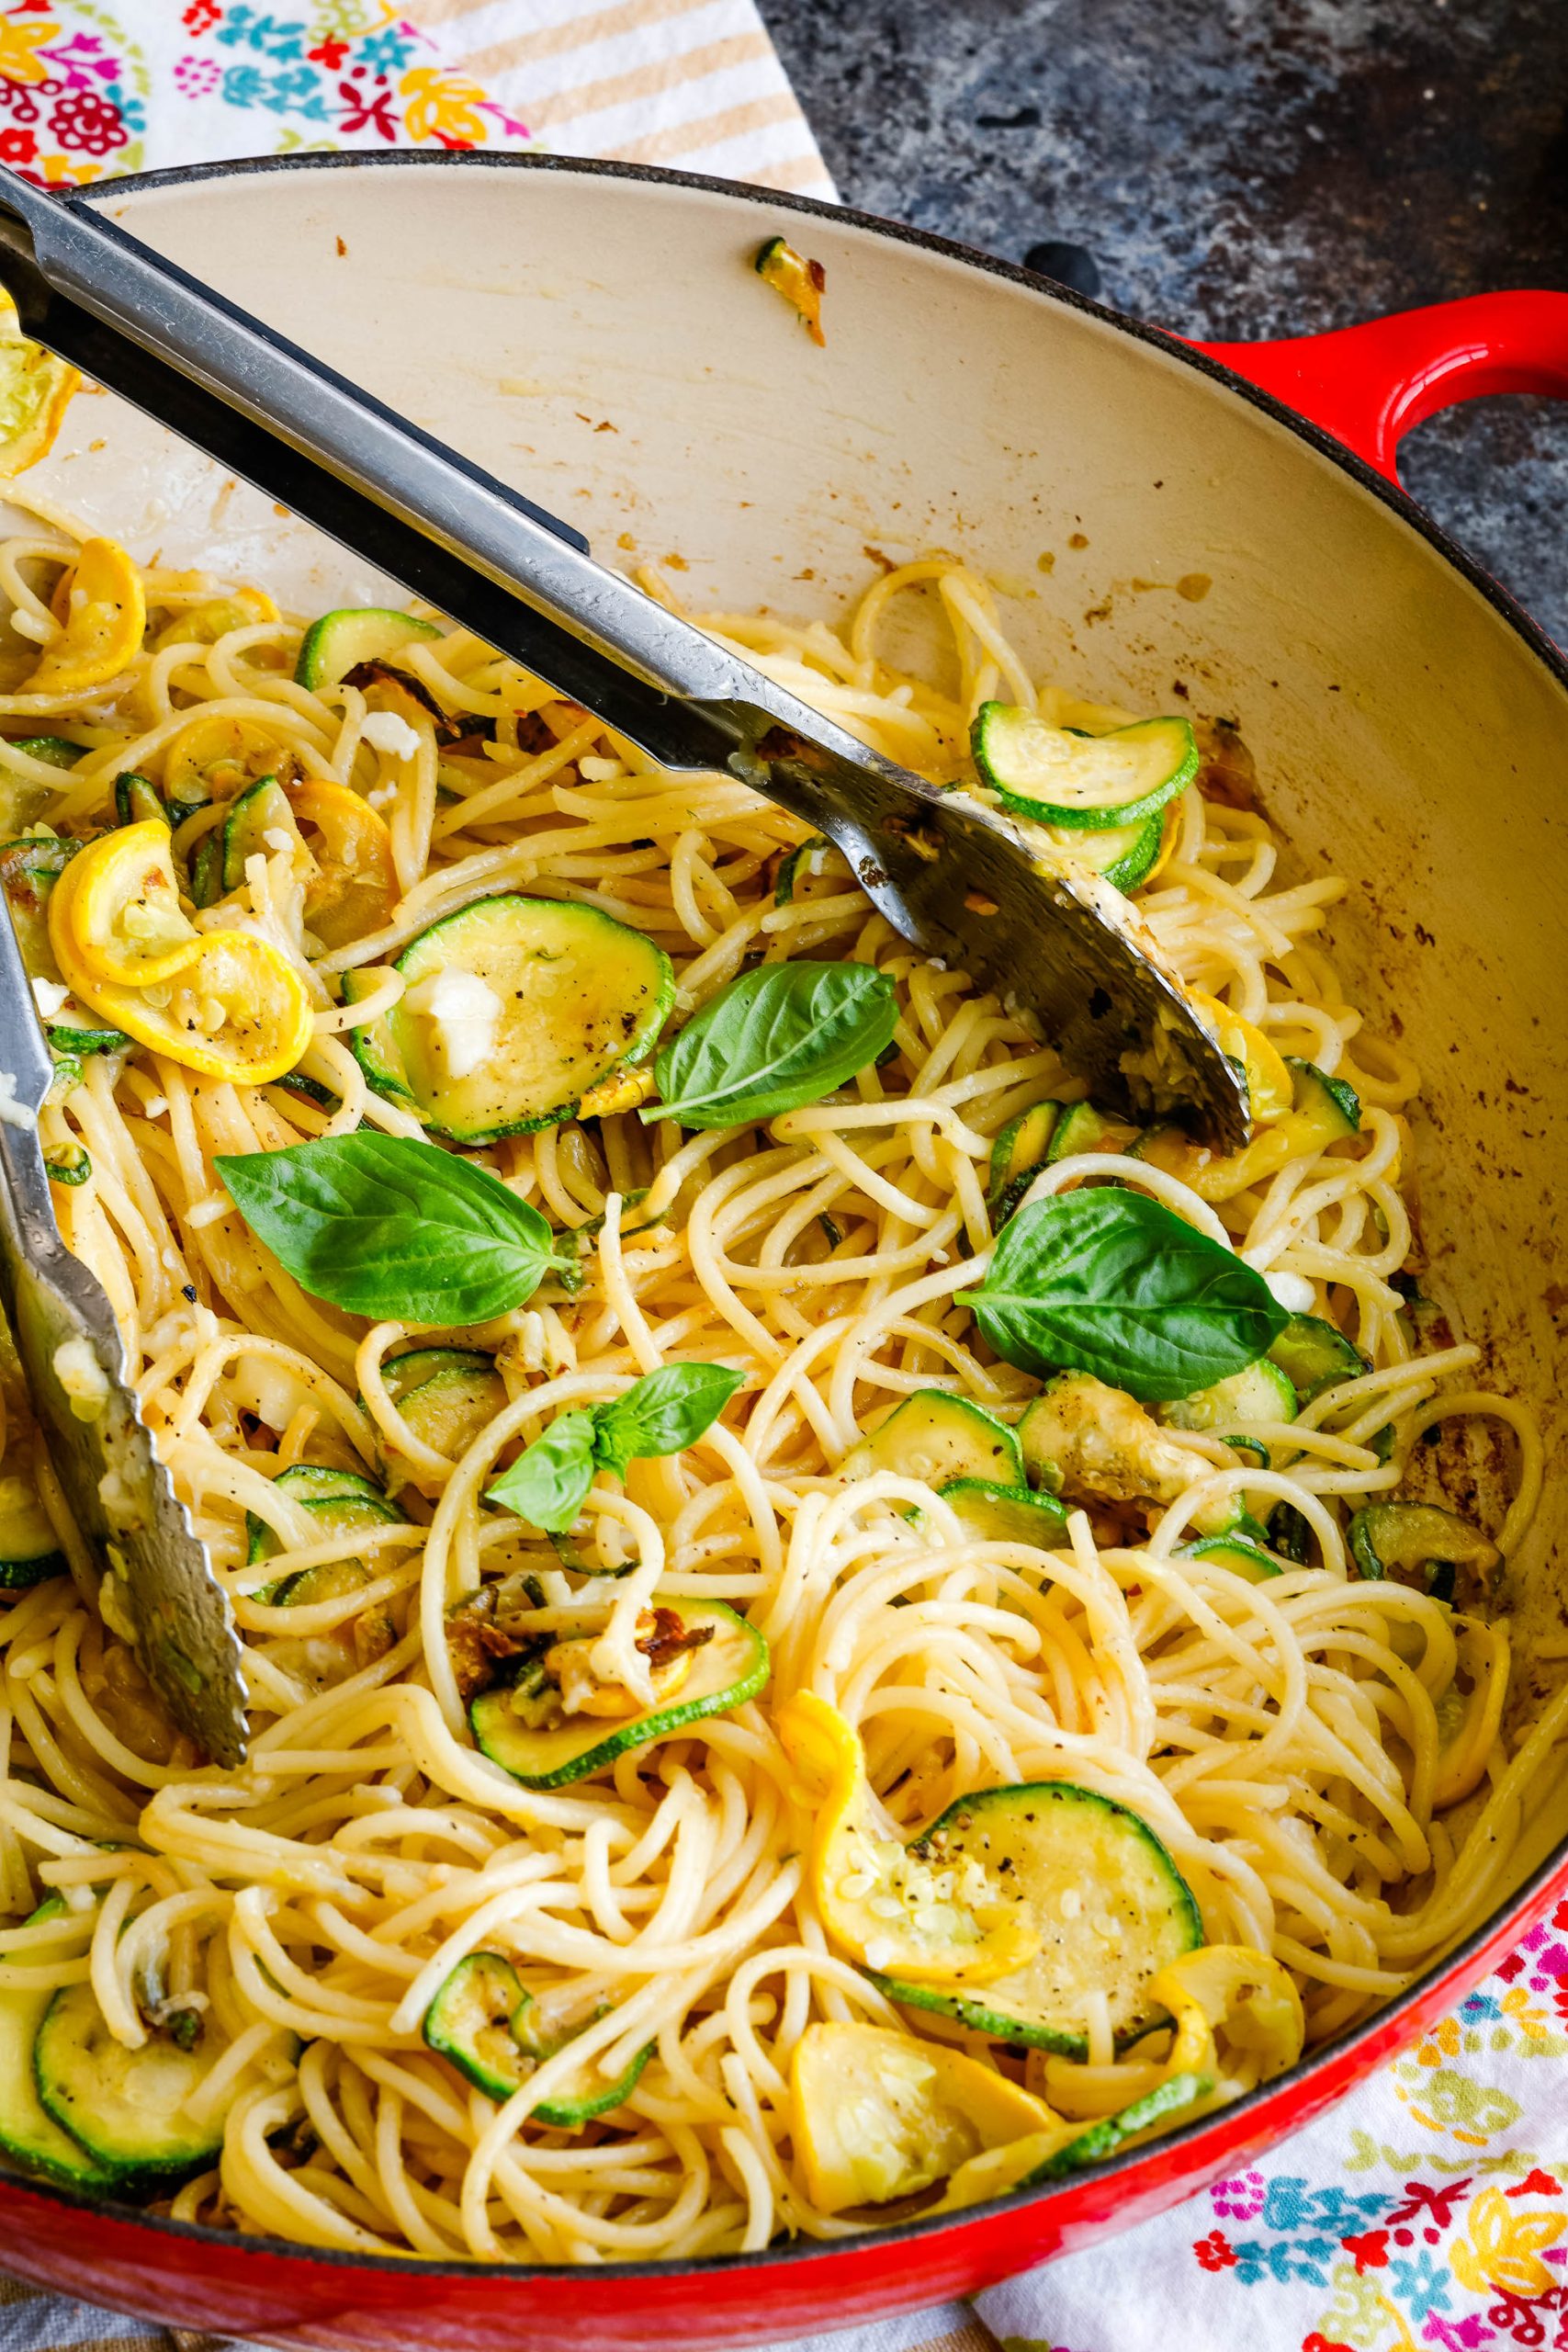 zucchini and squash with spaghetti noodles in a pan